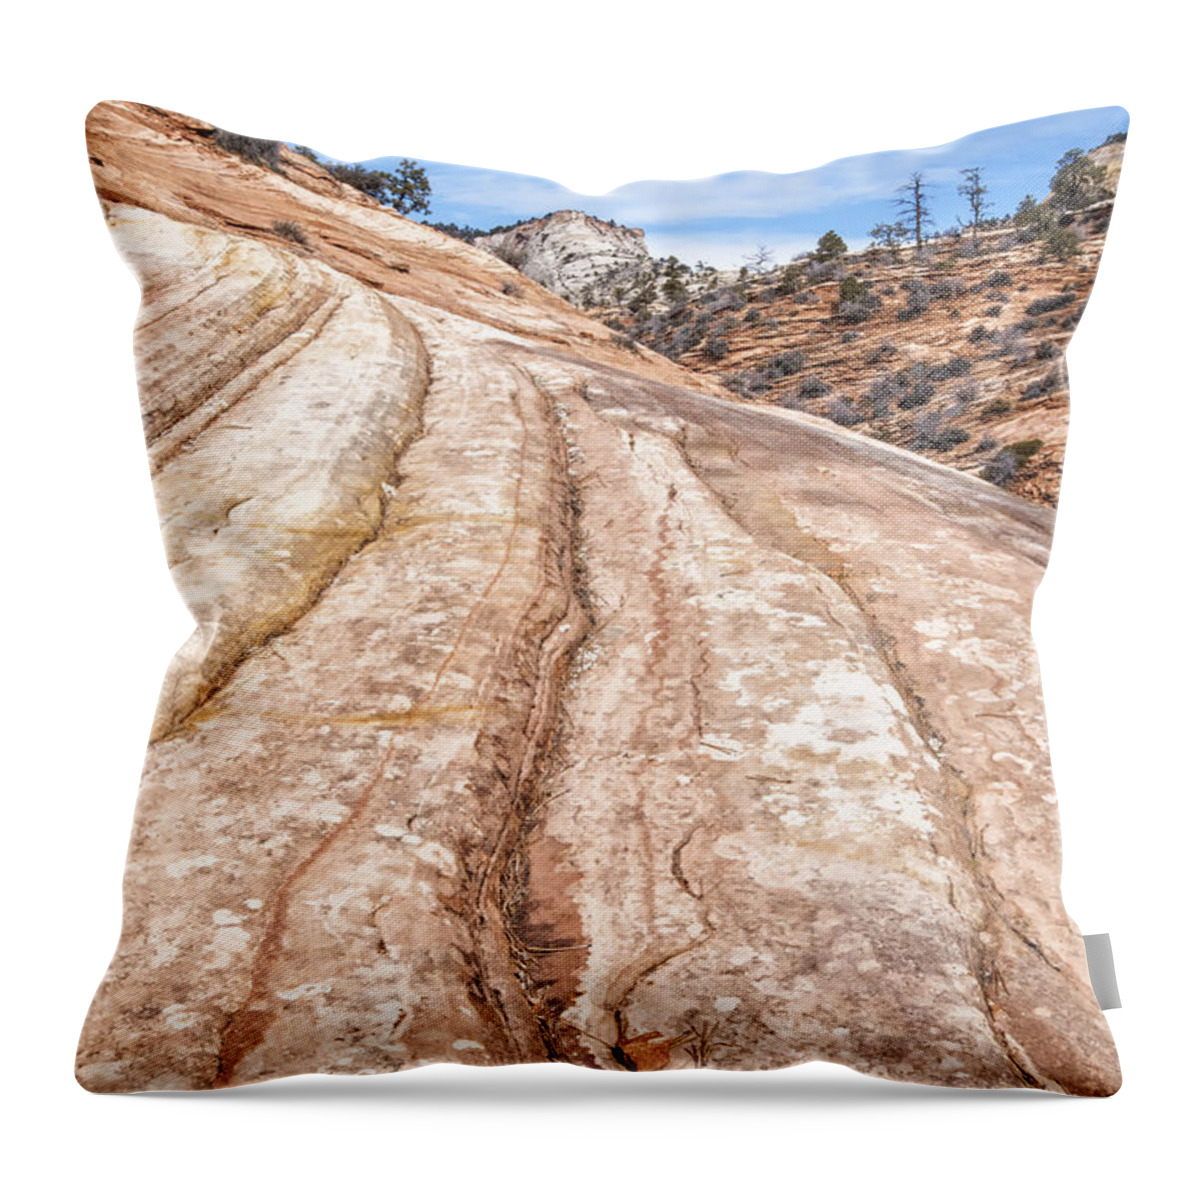 Crystal Yingling Throw Pillow featuring the photograph Rain Worn by Ghostwinds Photography